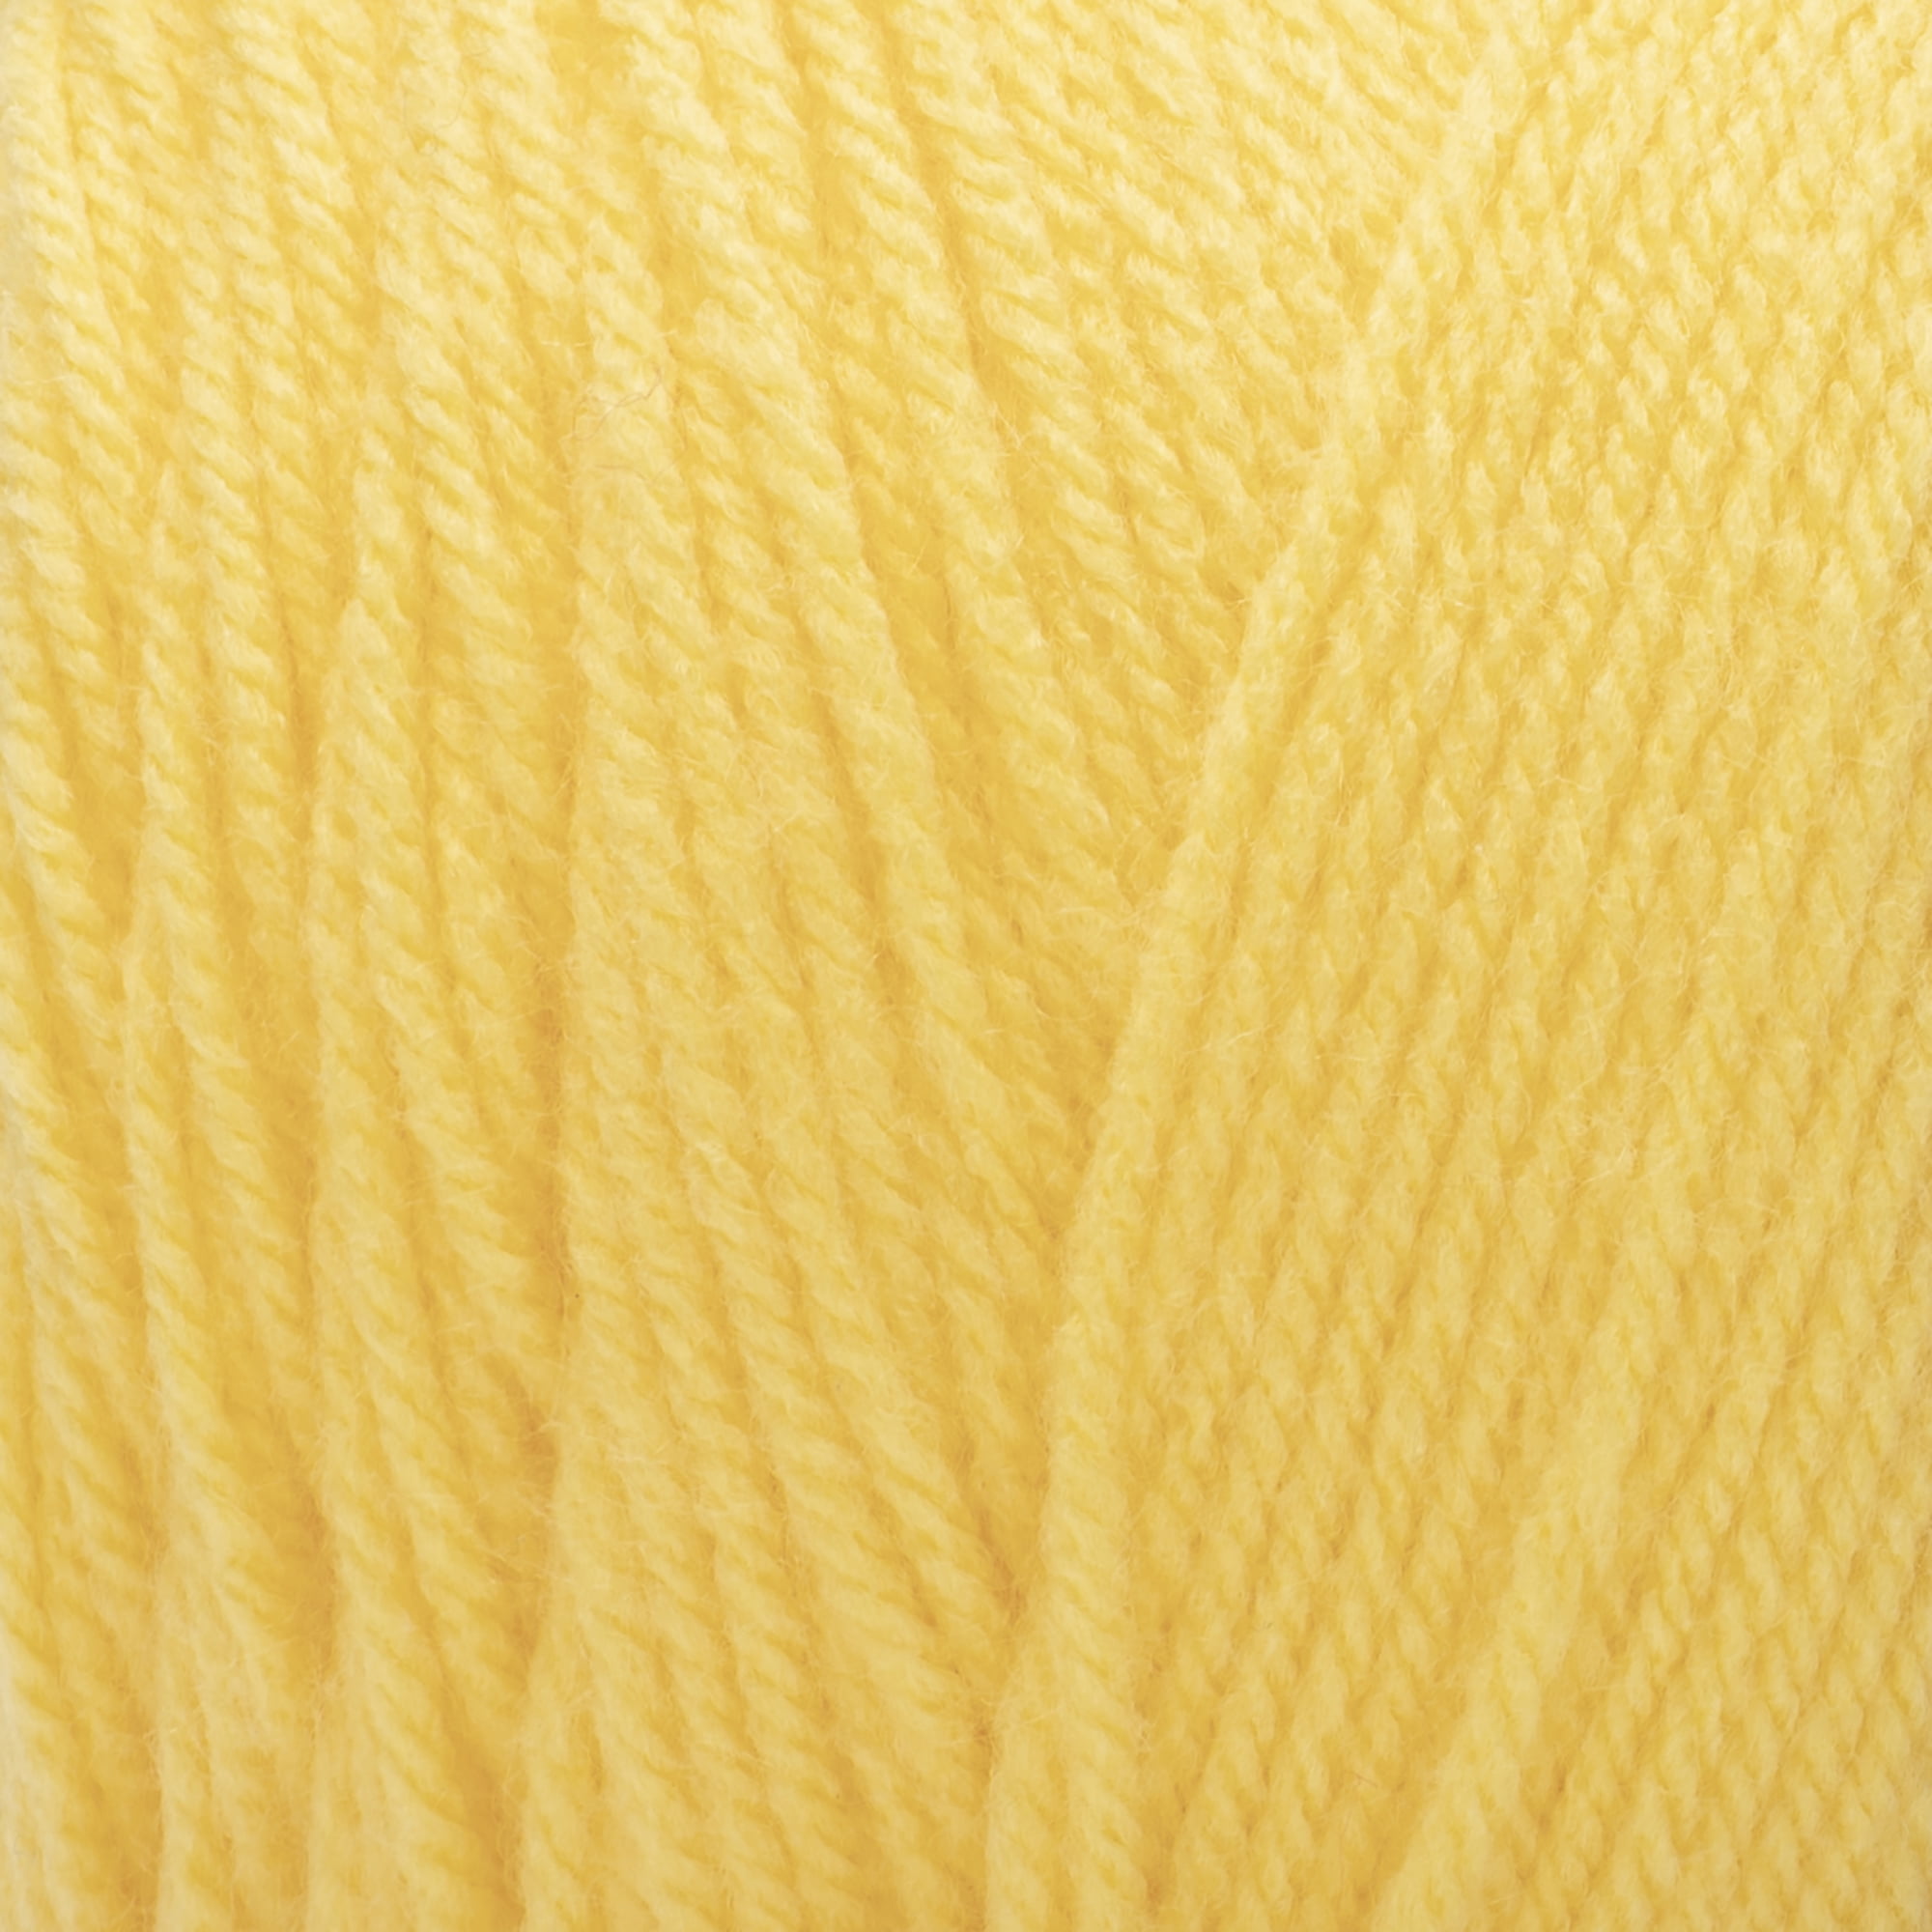 Mainstays Home 4 Ply Worsted Weight Yarn 100% Acrylic 8 oz. 01620 Soft  Yellow